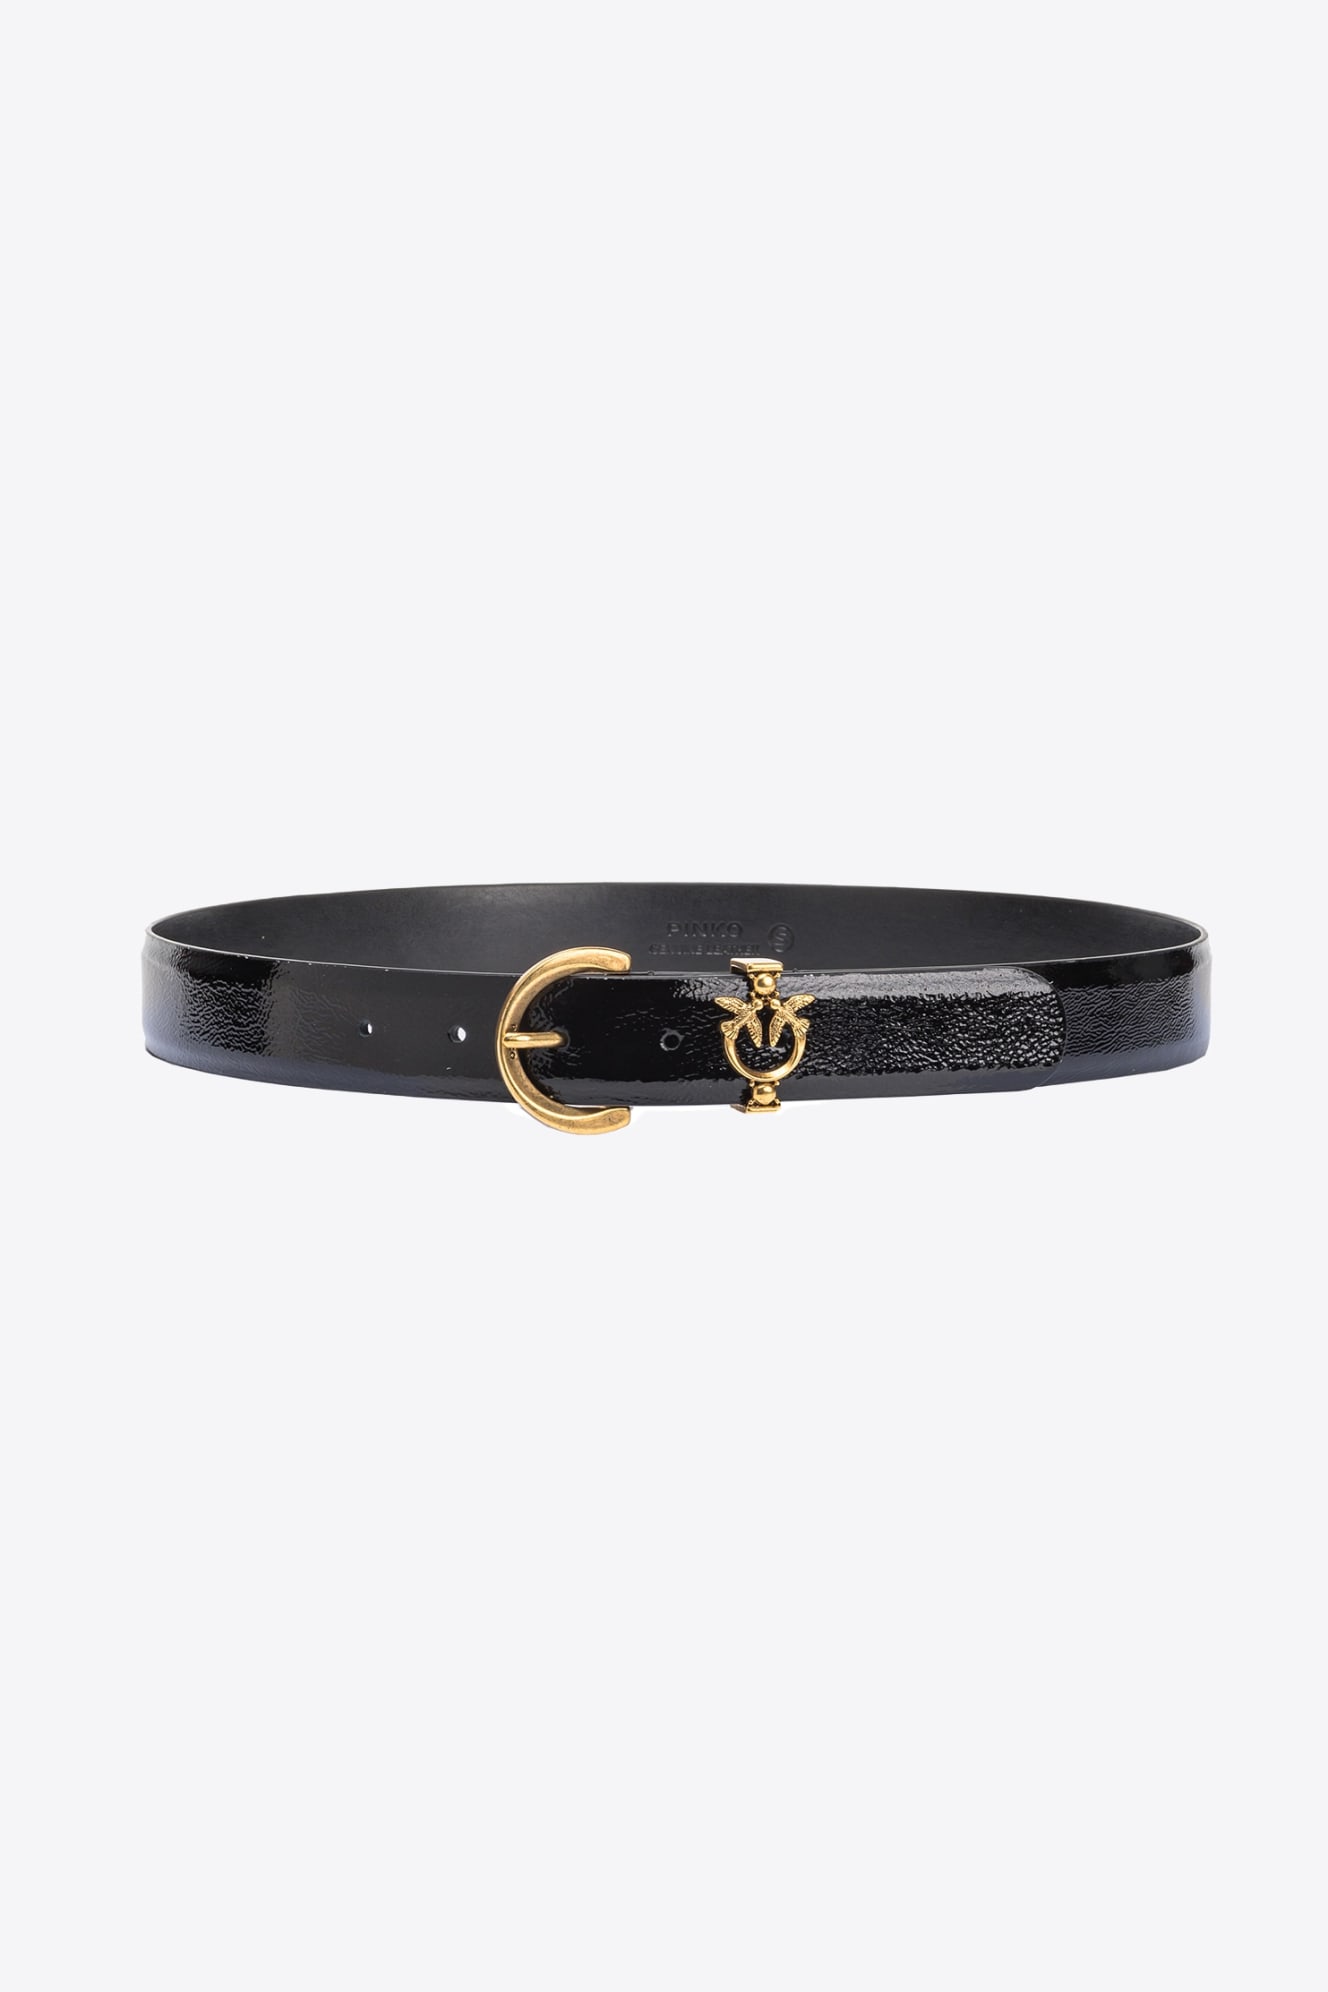 Patent leather belt with Love Birds detail 3cm | PINKO (Global)